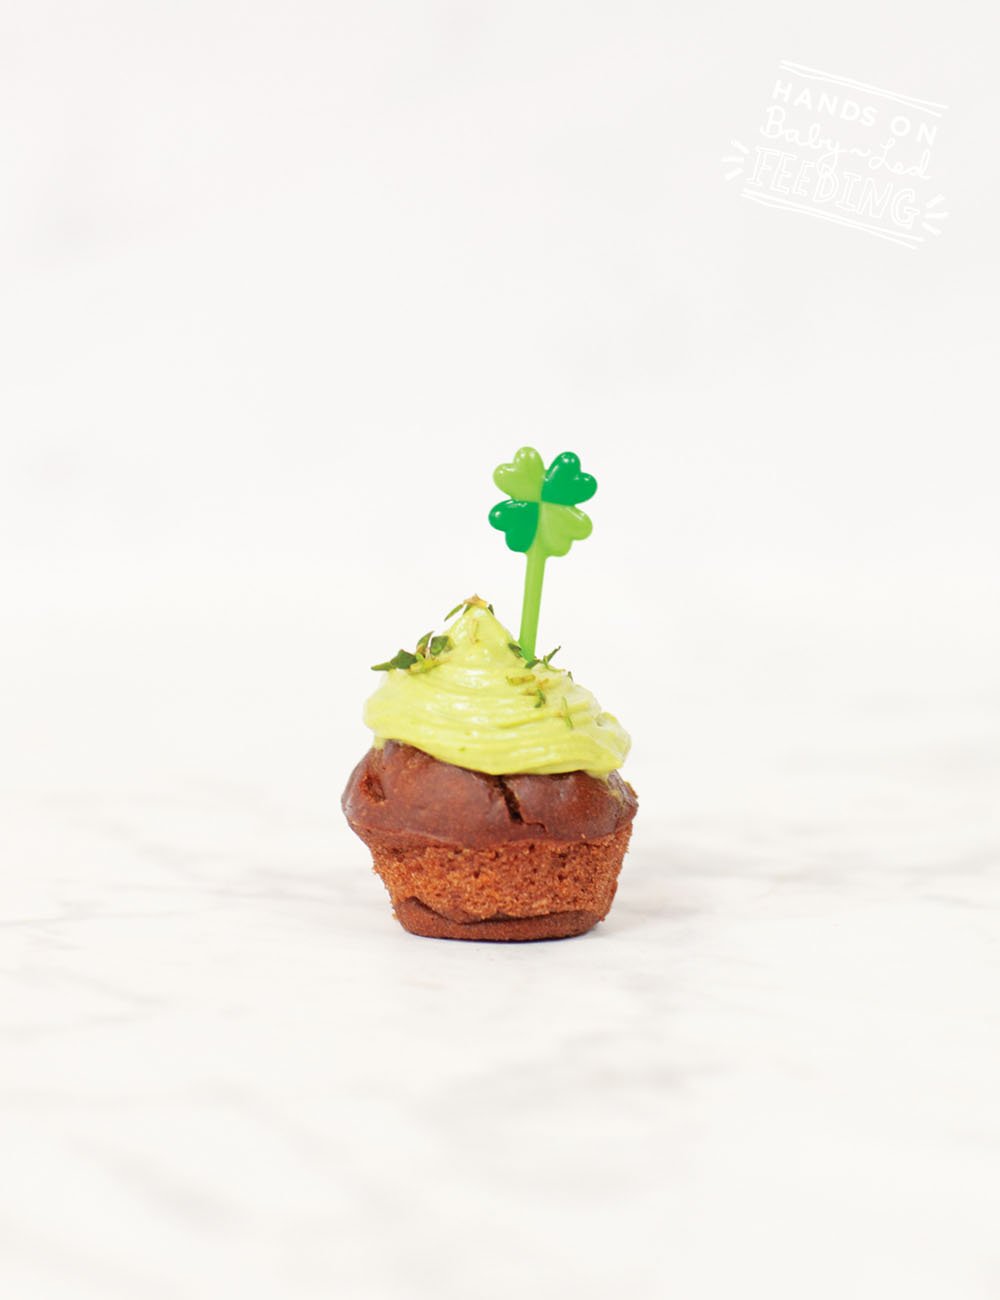 Chocolate Muffins with Green Frosting Recipe Images4